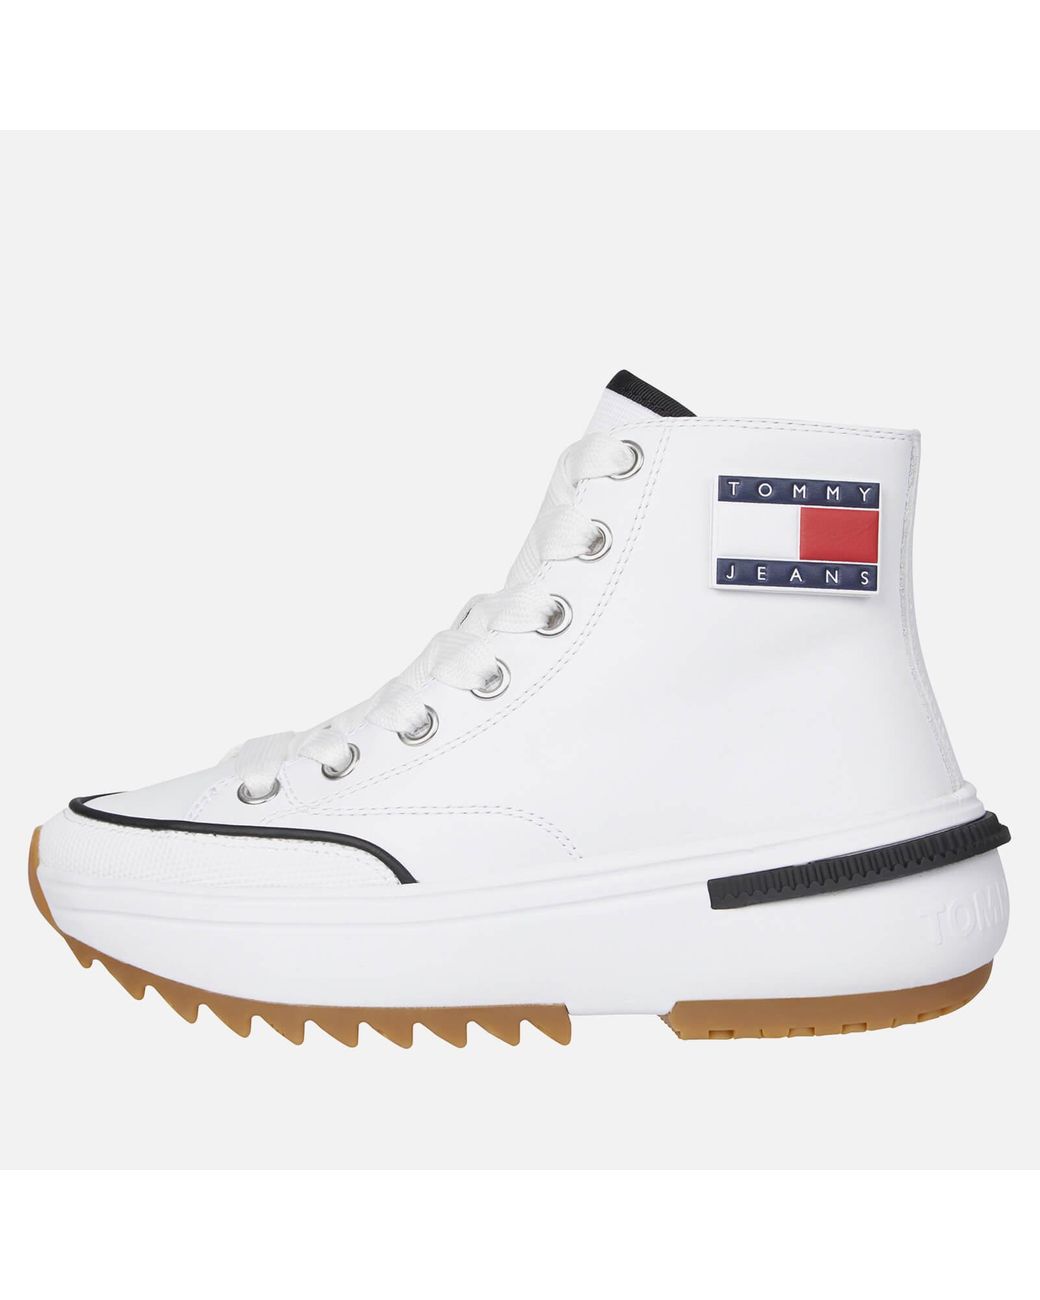 Hilfiger Mid Run Hi-top Trainers in White | Lyst